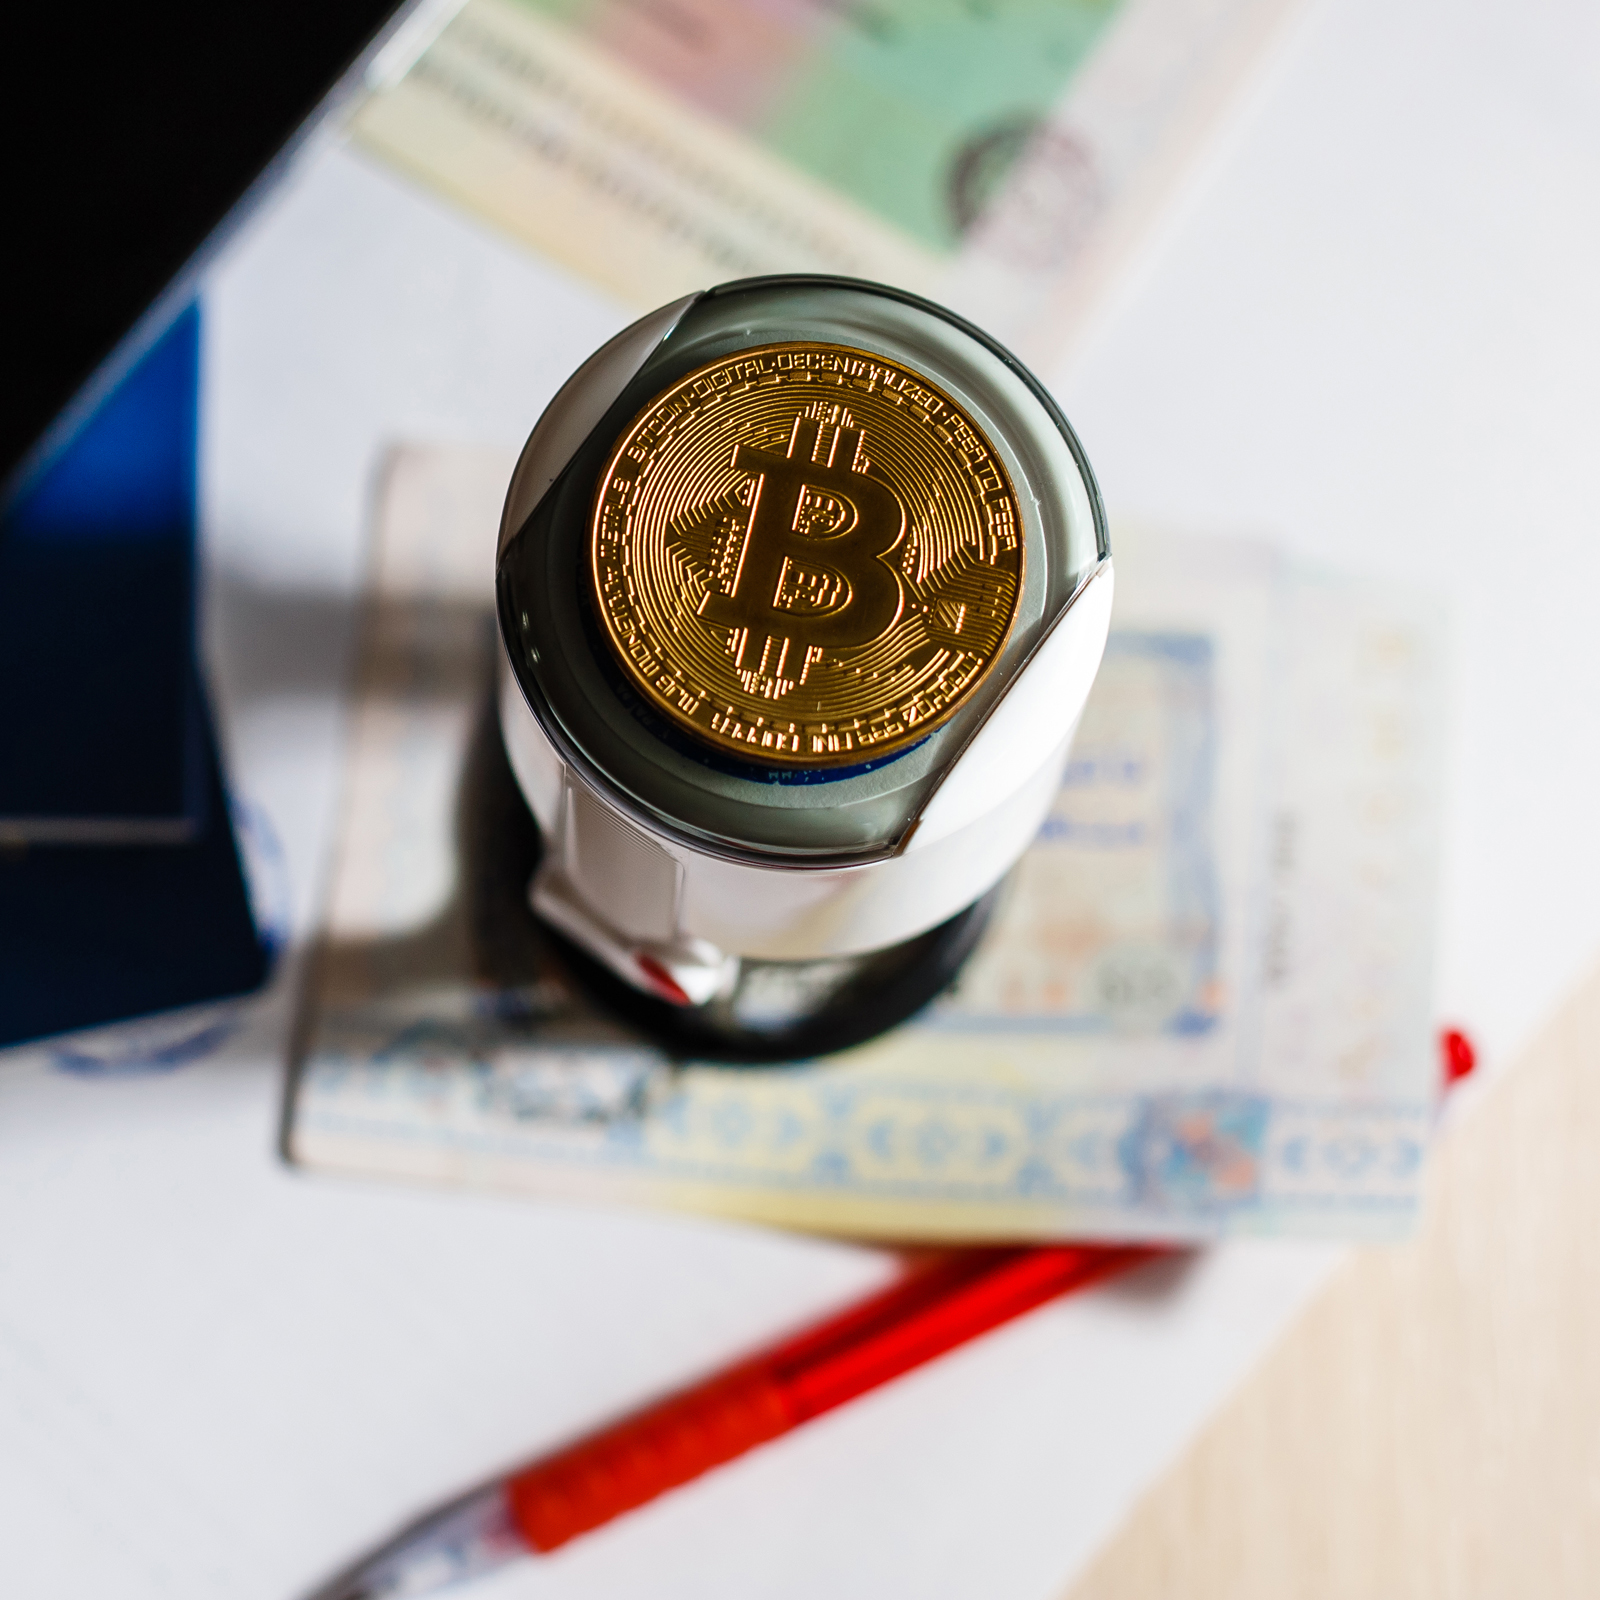 New Bill Proposes 5% Tax on Crypto Incomes in Ukraine - Bitcoin News